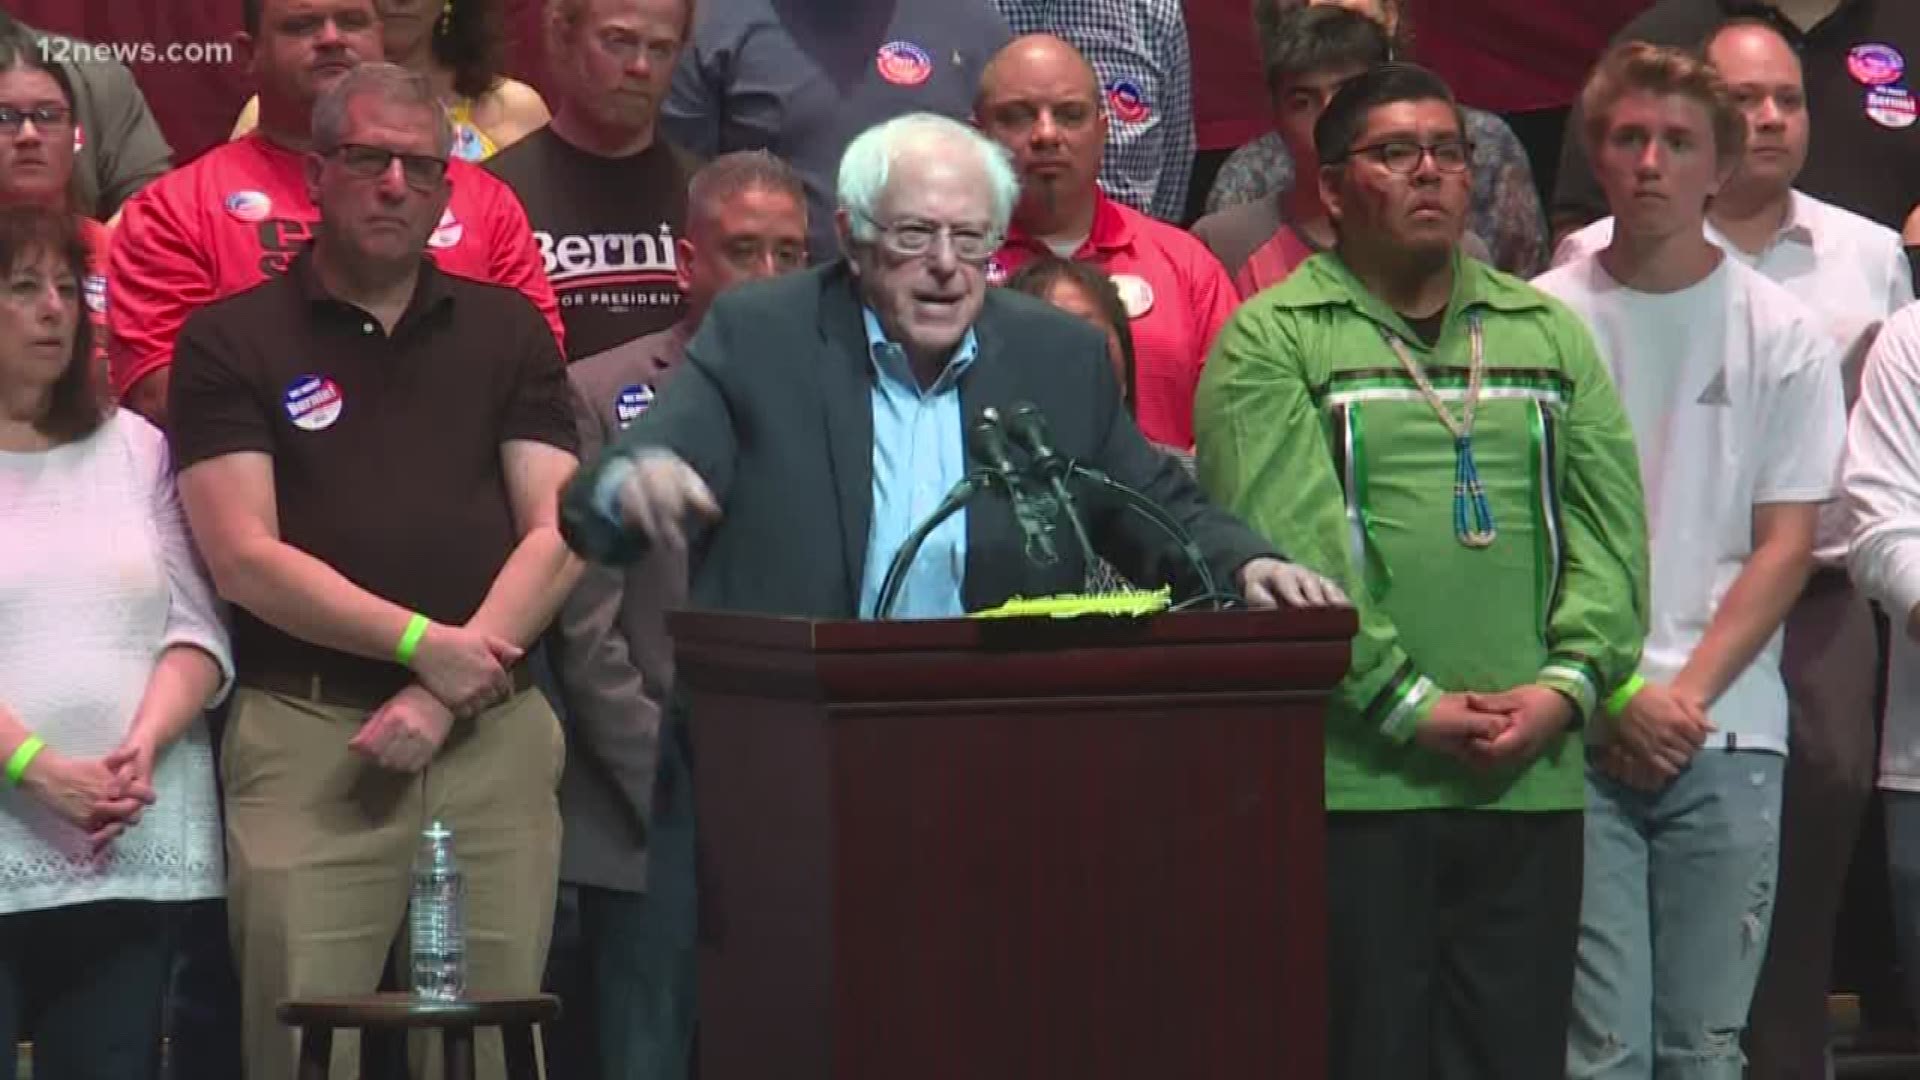 Bernie Sanders is hosting a campaign rally in Tempe on Tuesday. The former presidential candidate will be here to stump for the Democrats, including gubernatorial candidate David Garcia.